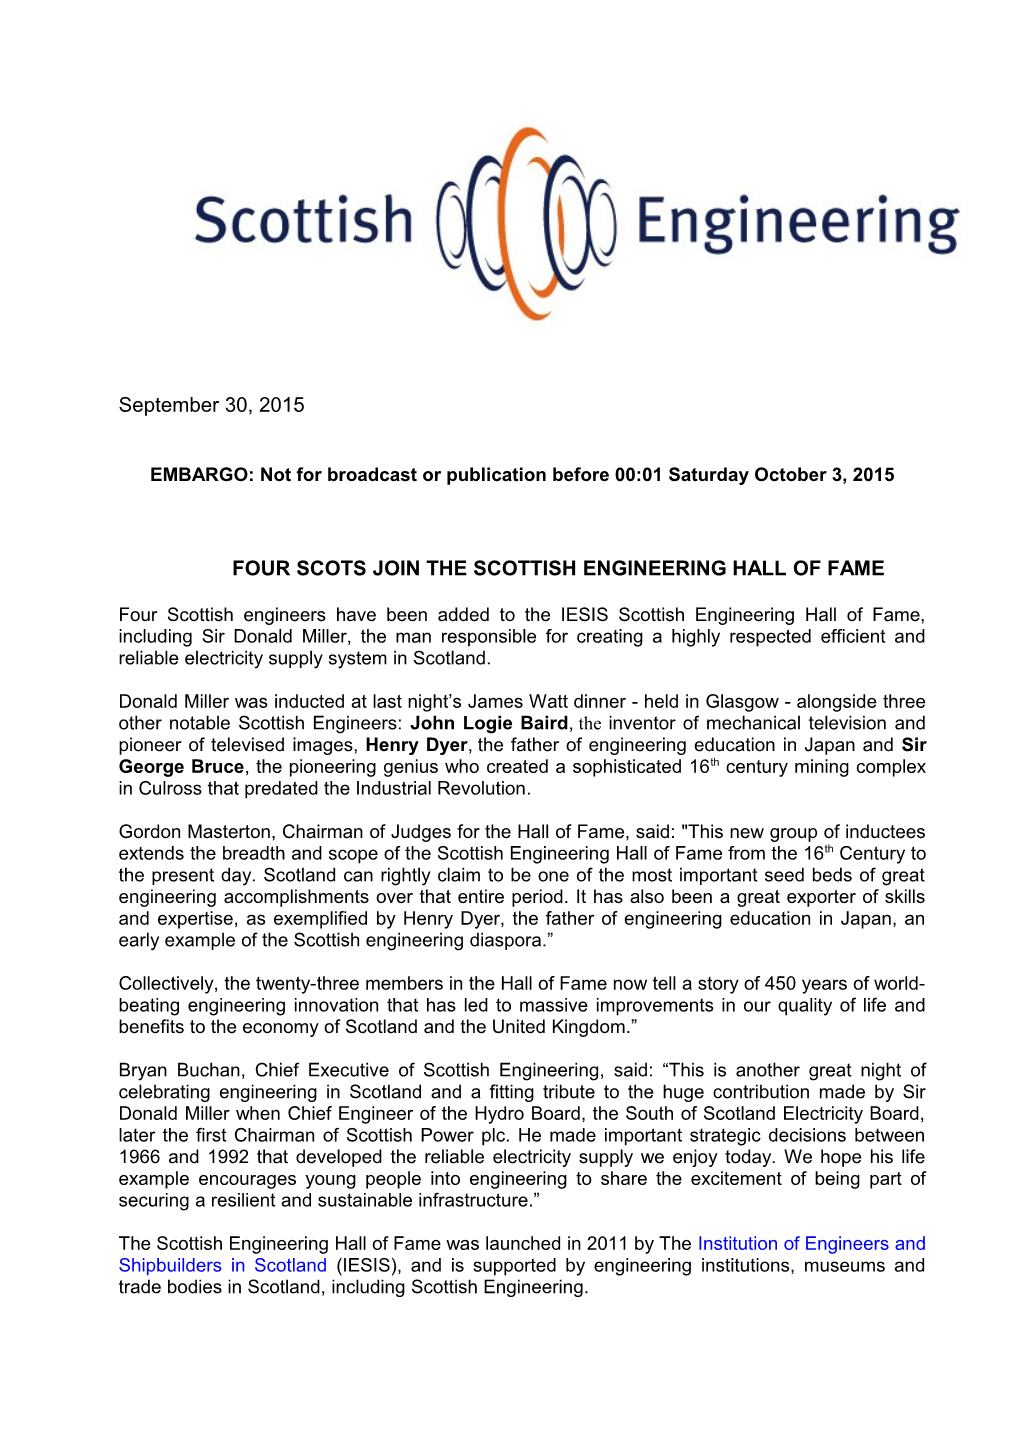 Four Scots Join Thescottish Engineering Hall of Fame